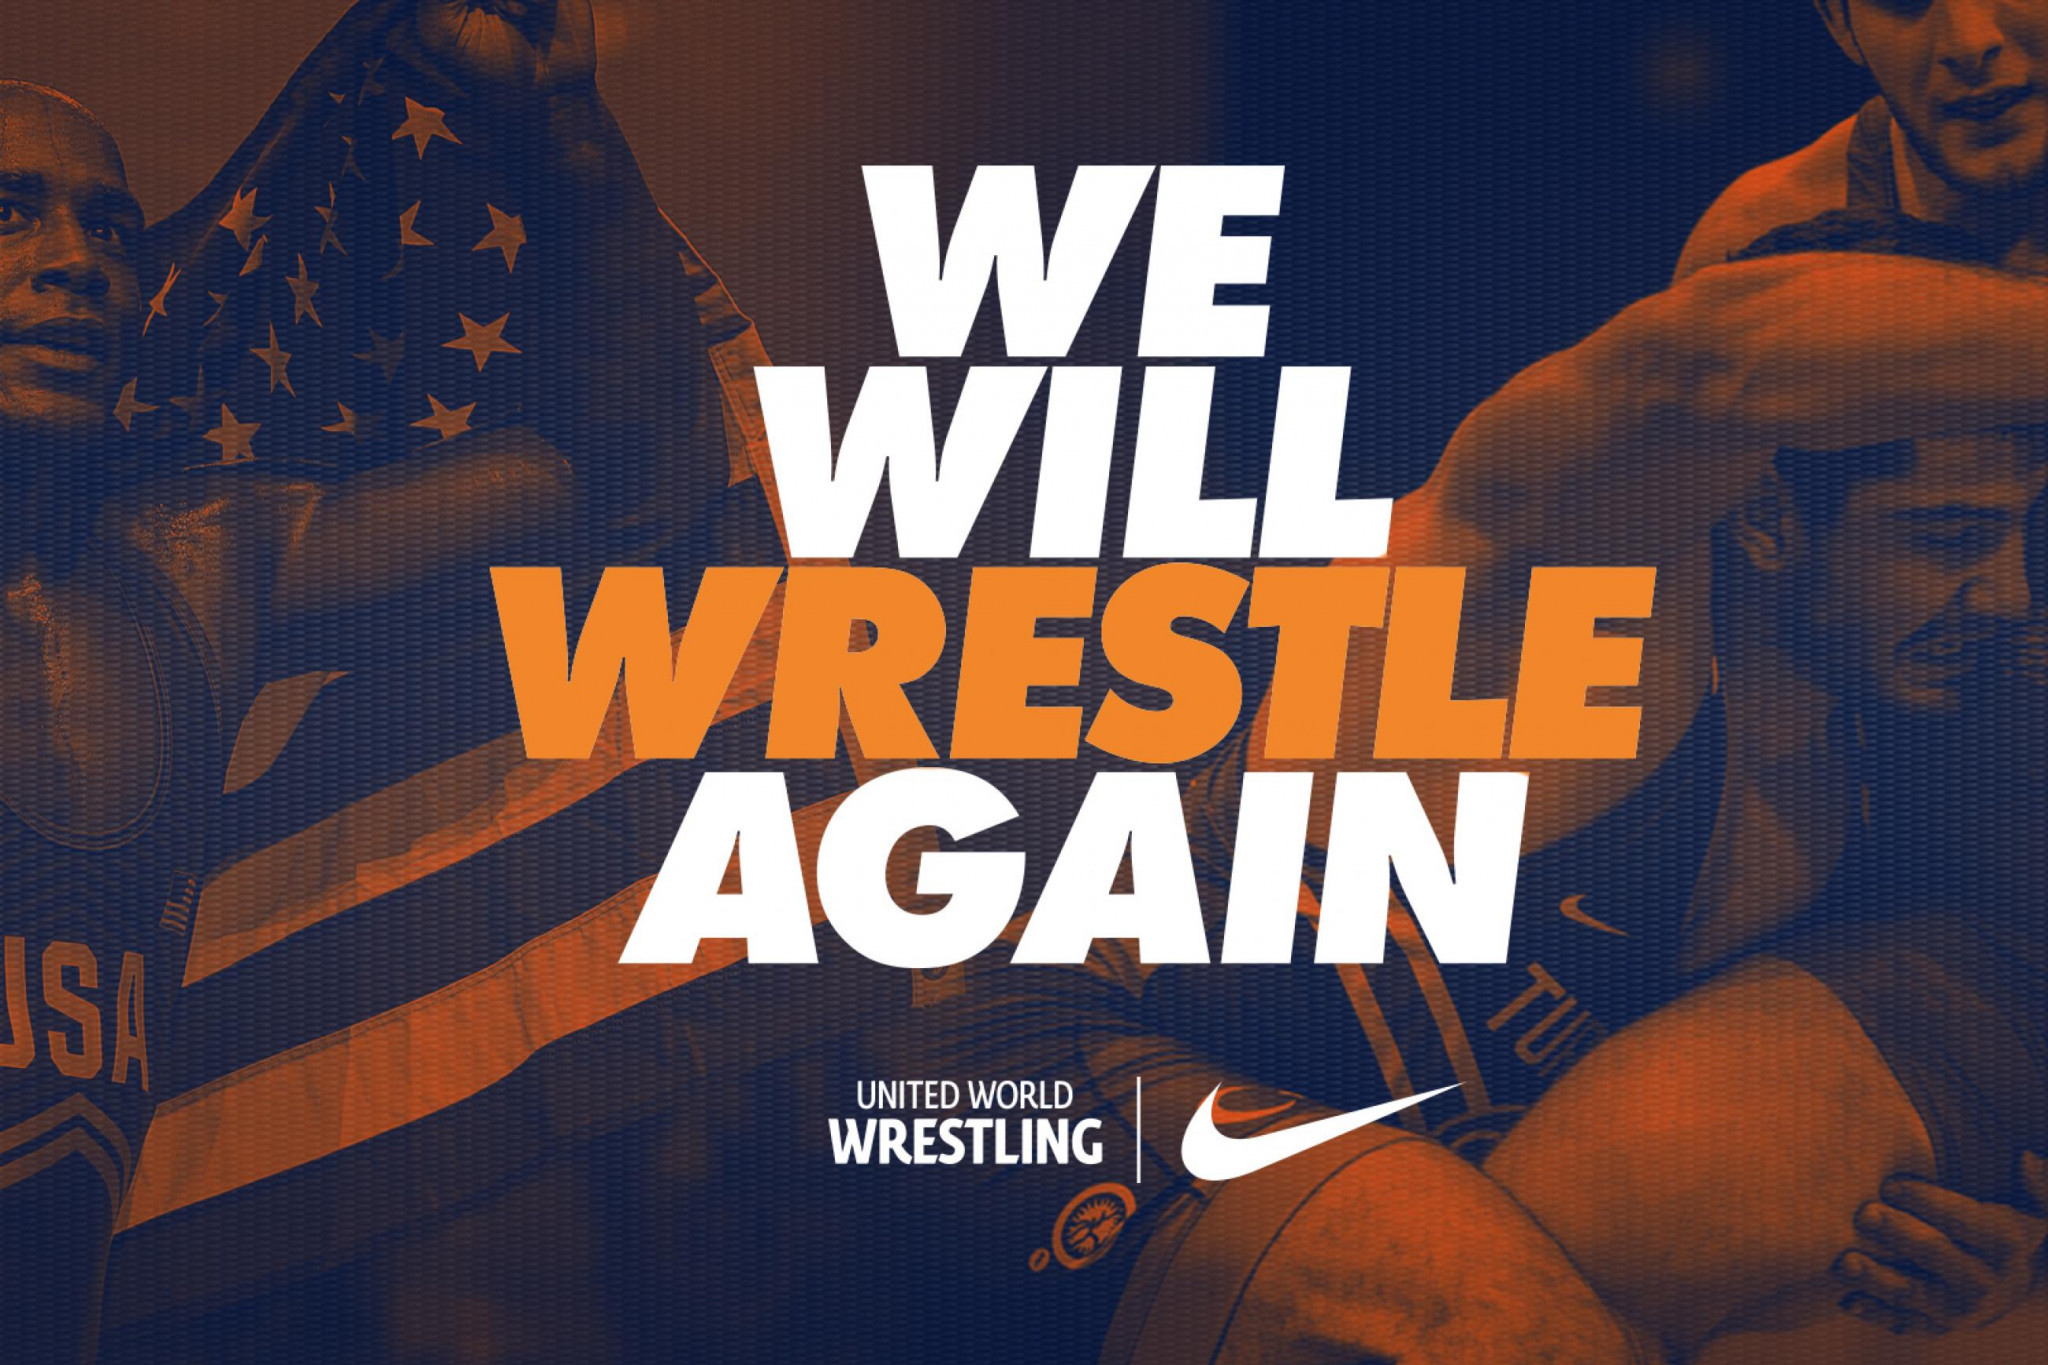 UWW have partnered with Nike Wrestling for its new campaign ©UWW